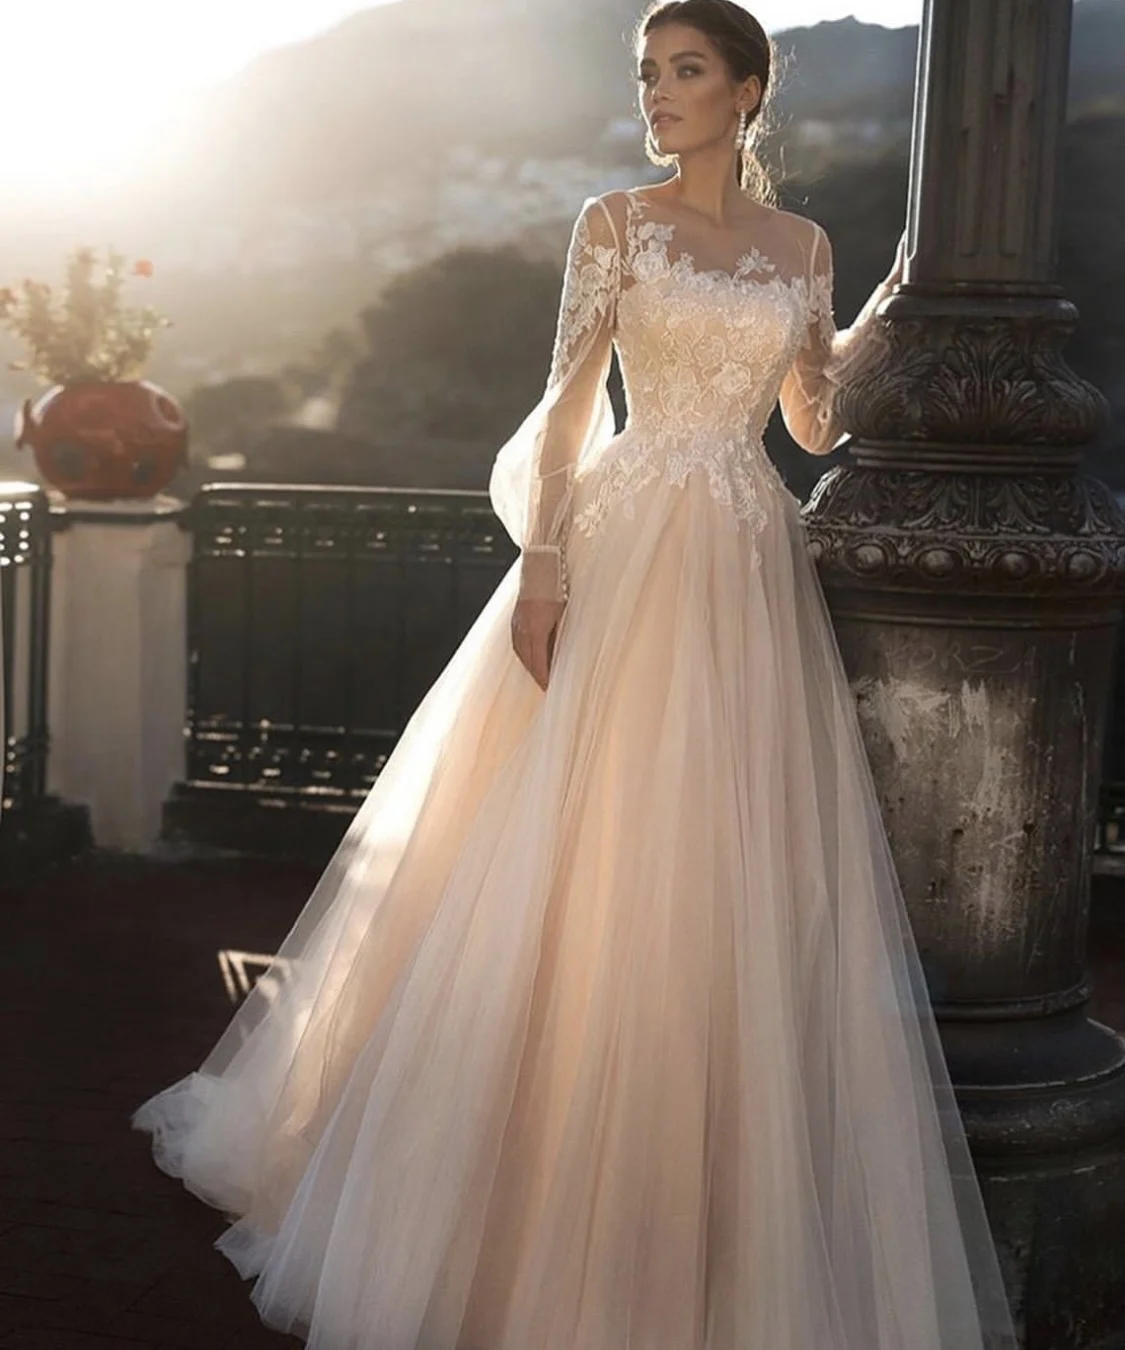 

Wedding Dress A-Line O-Neck Lantern Sleeve Lace Appliques Sequined Button Tulle Floor For Women Custom Made Civil Robe De Mariee